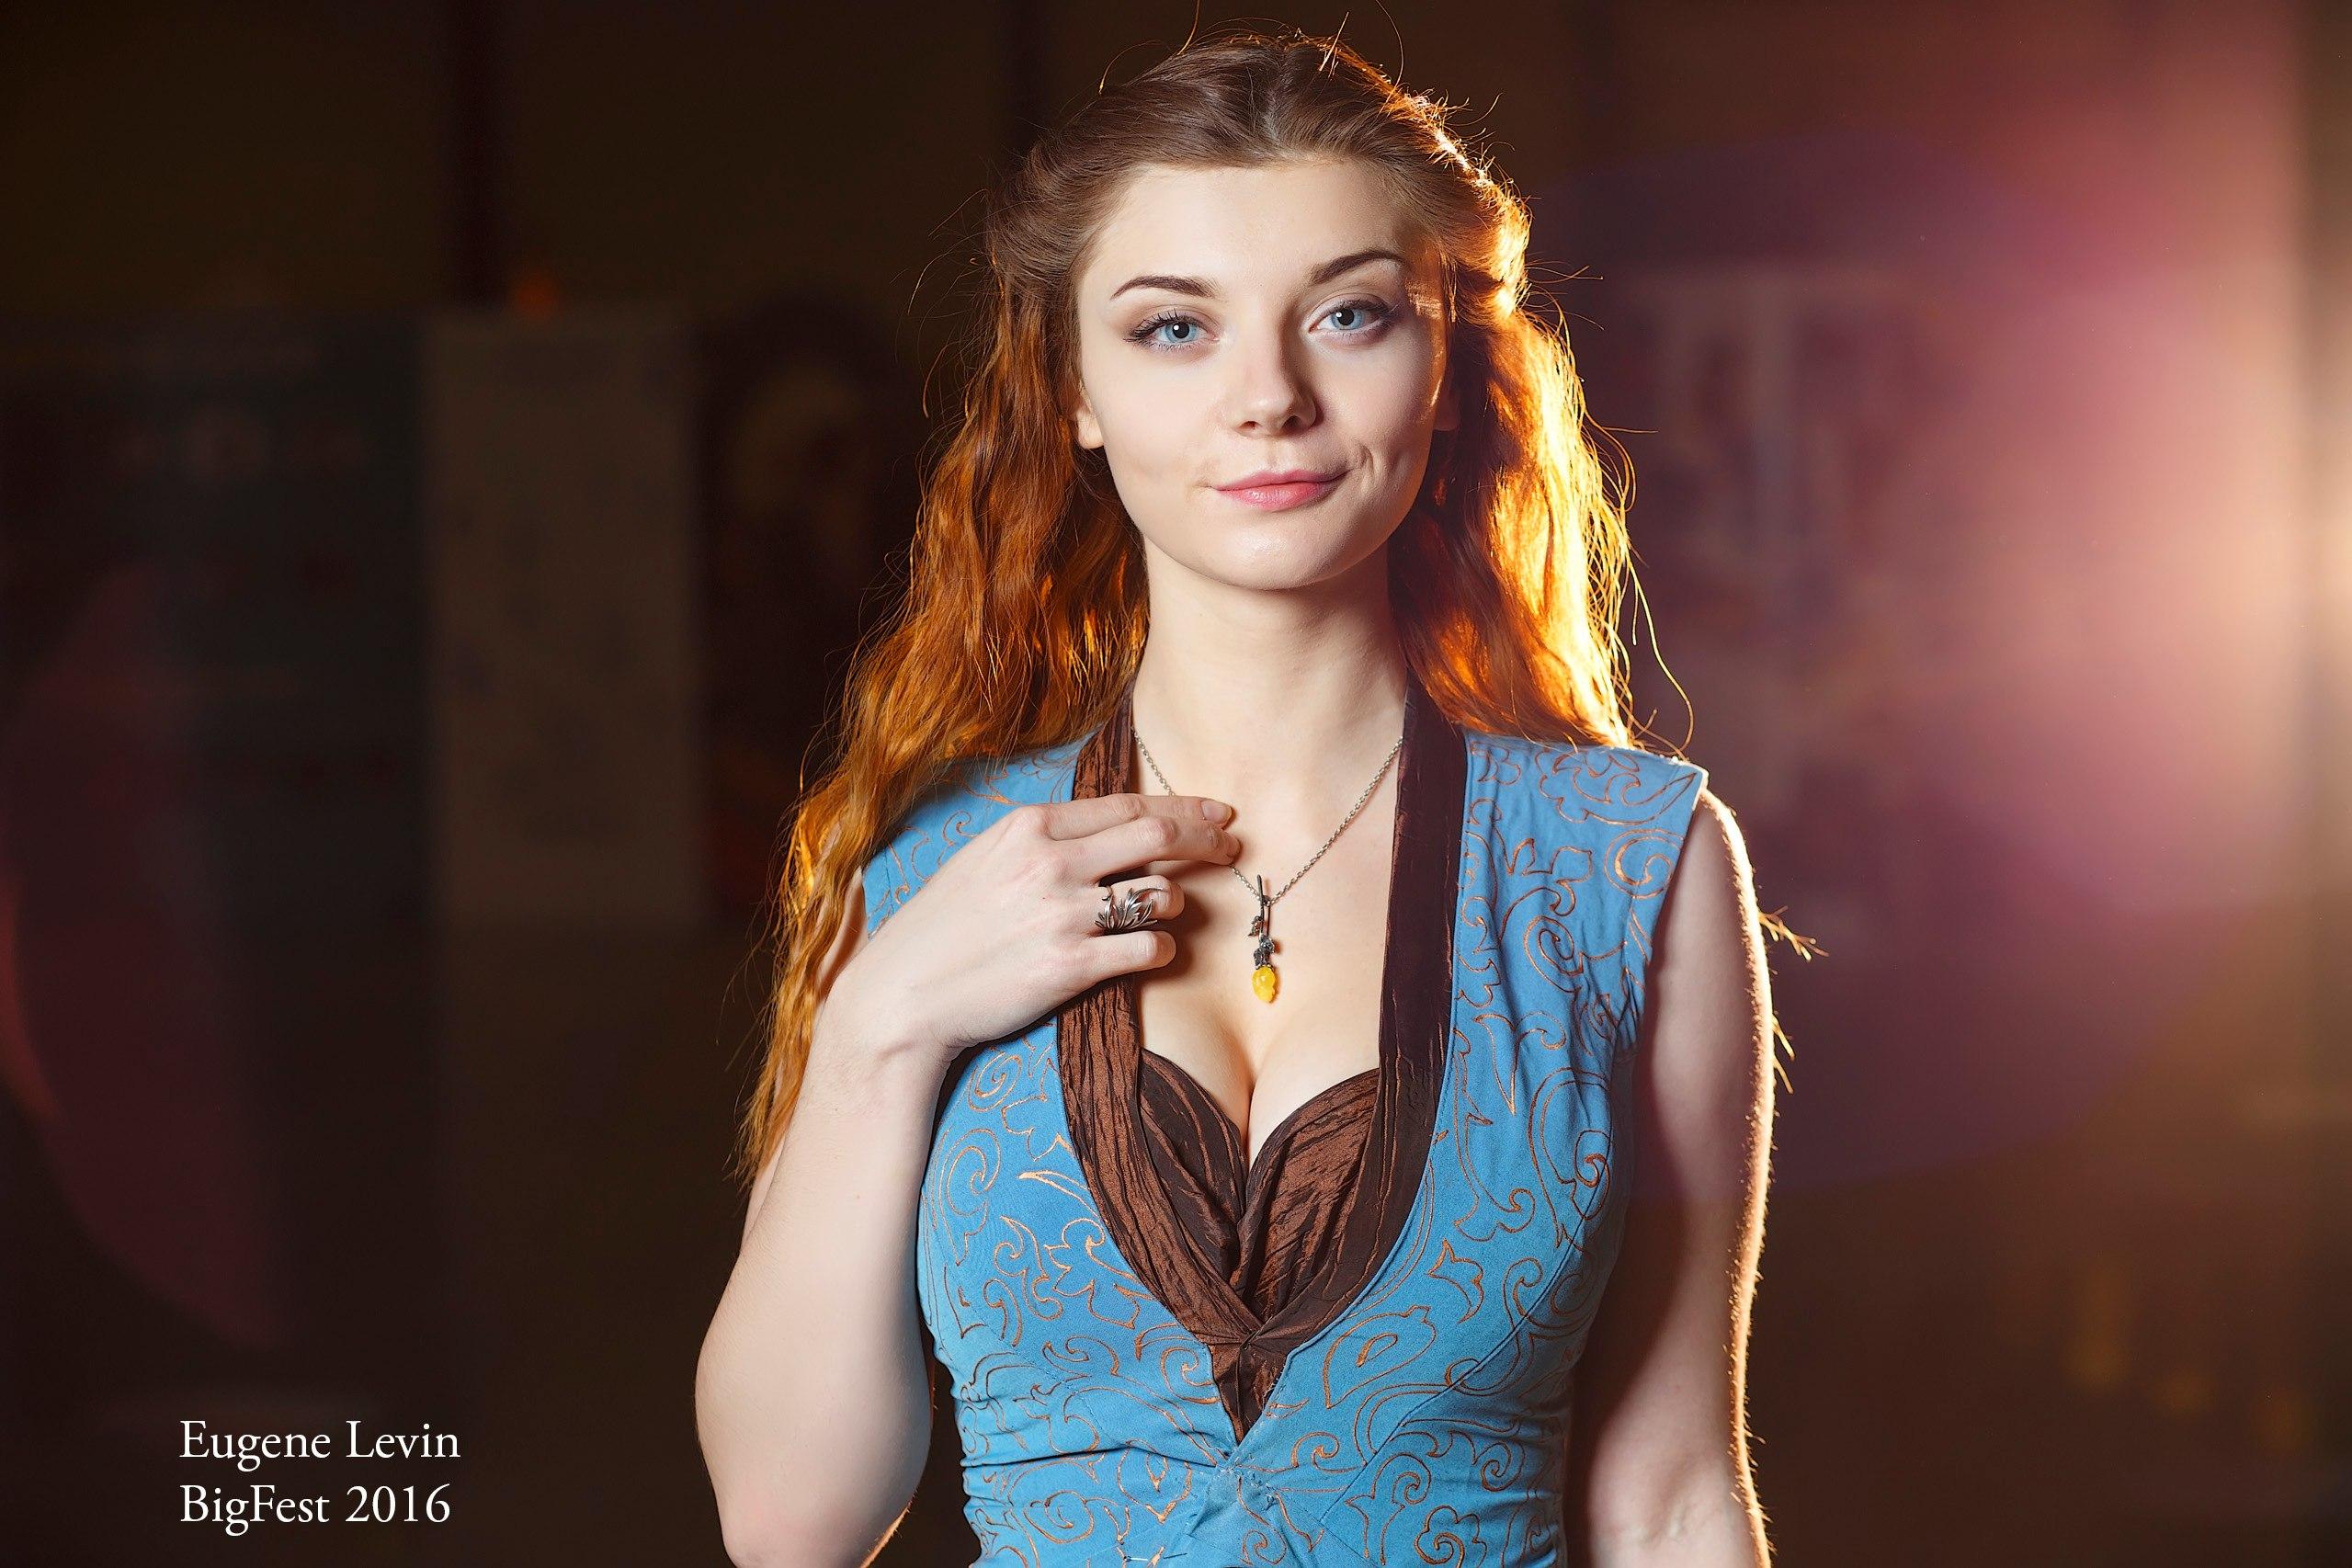 Margaery Tyrell, Is That You?